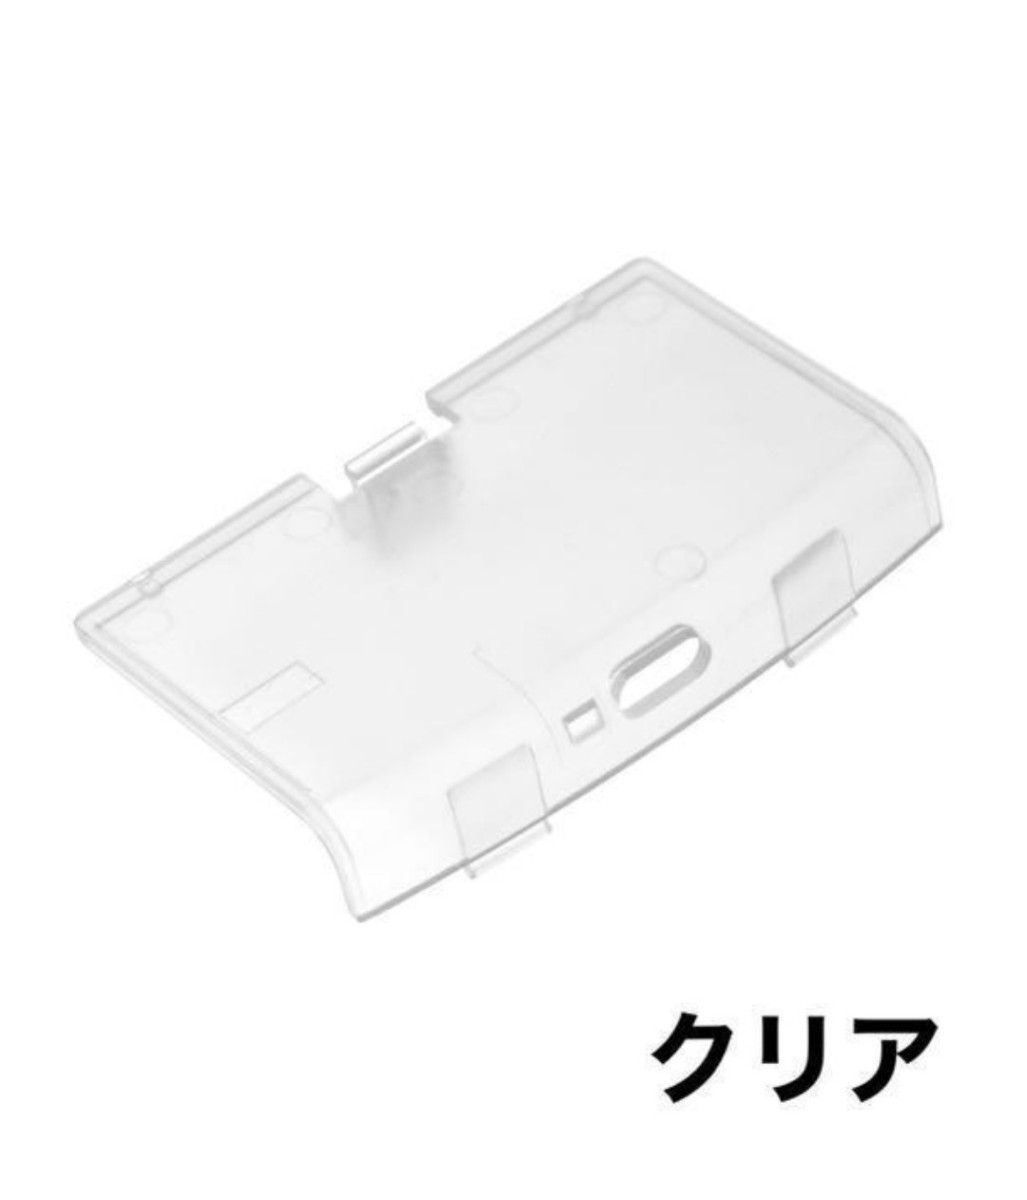 Clean Juice GBA バッテリーパック　最新ver